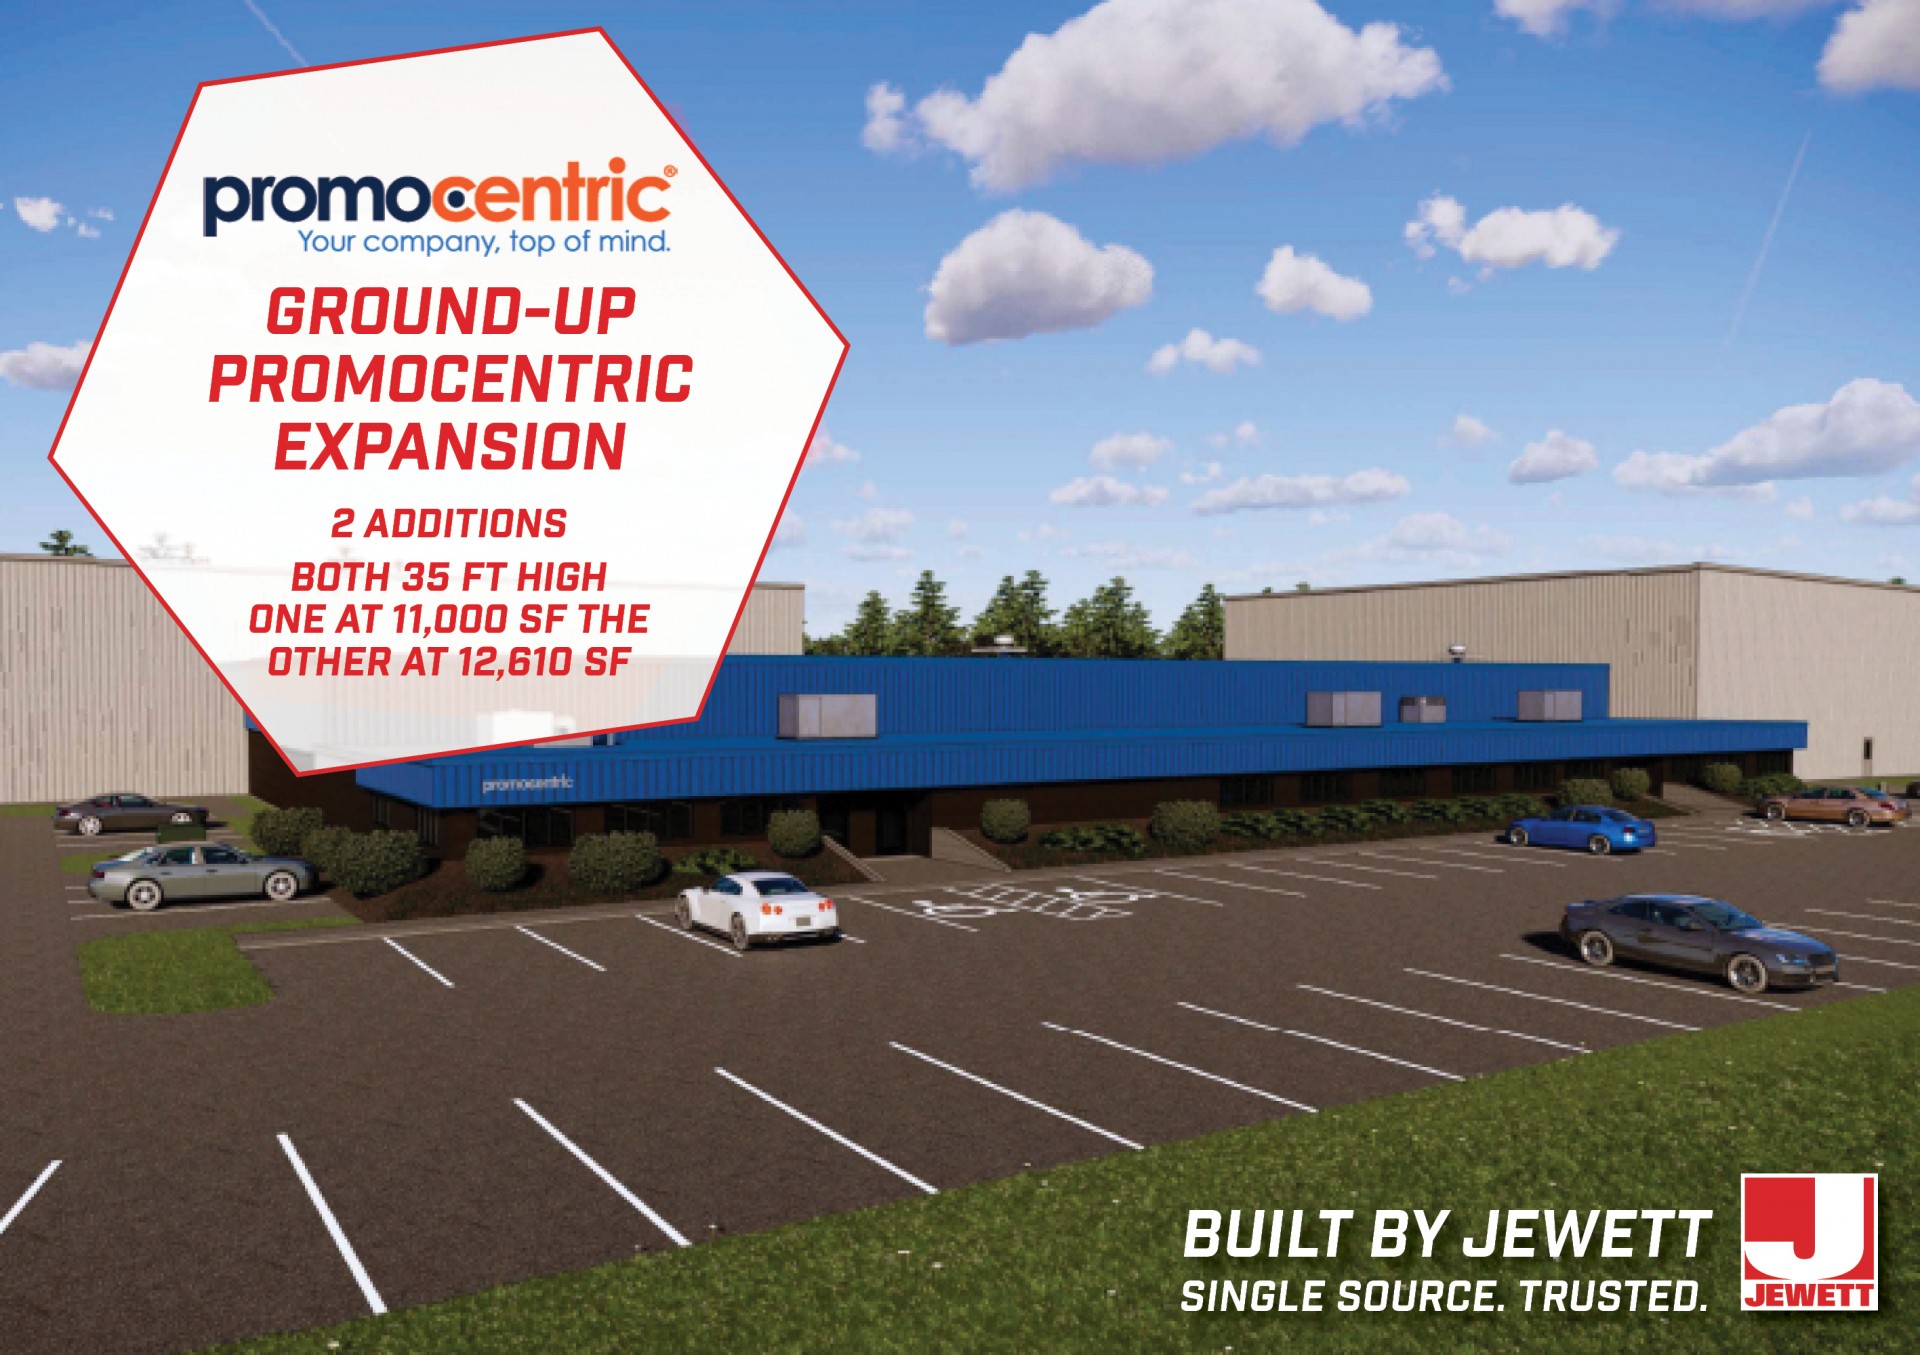 Jewett Construction to build a new expansion for Promocentric